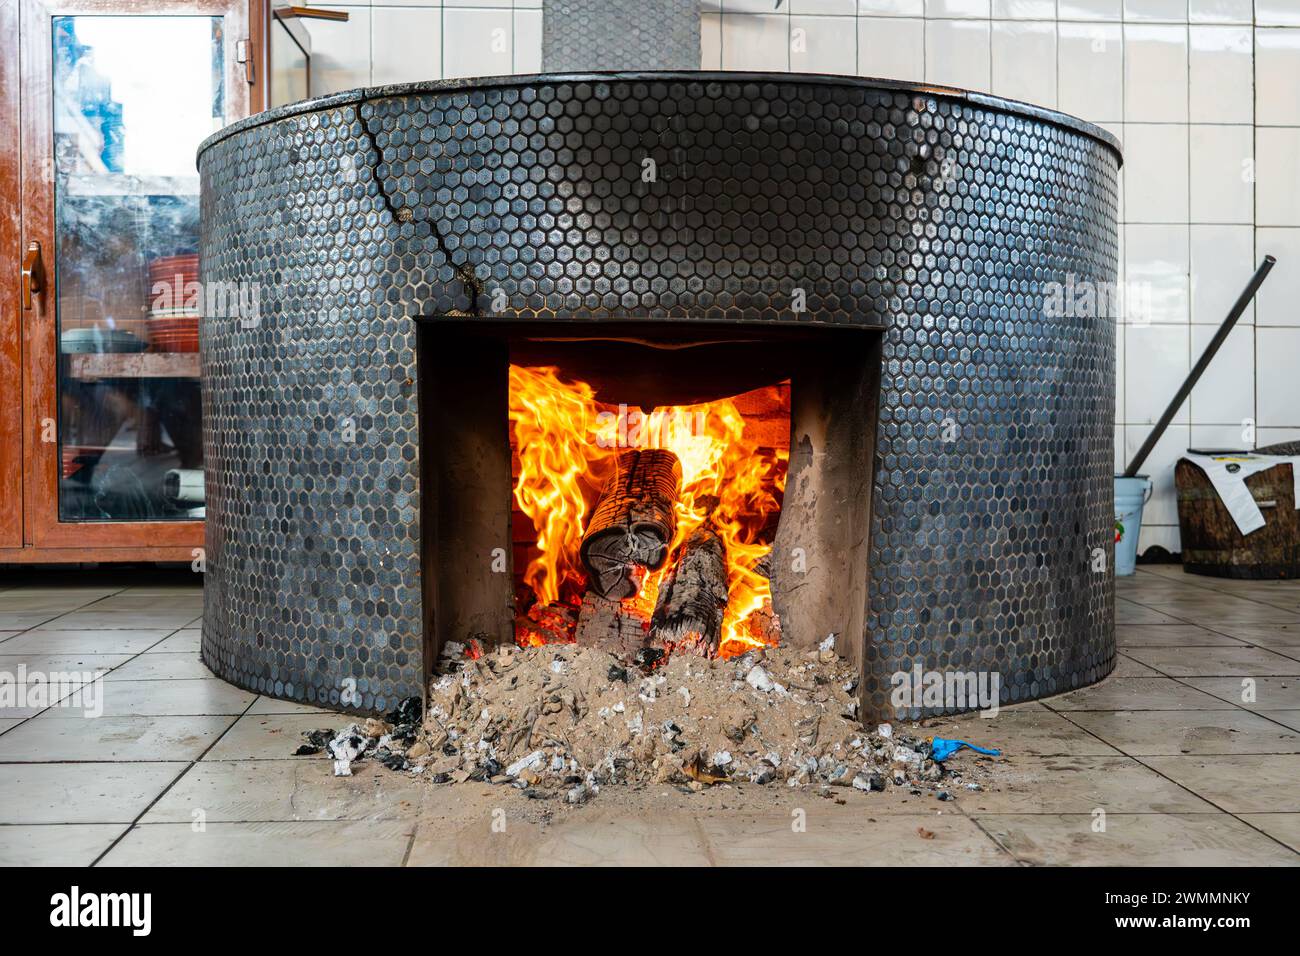 the fire heats up a large cooking pot. Stock Photo